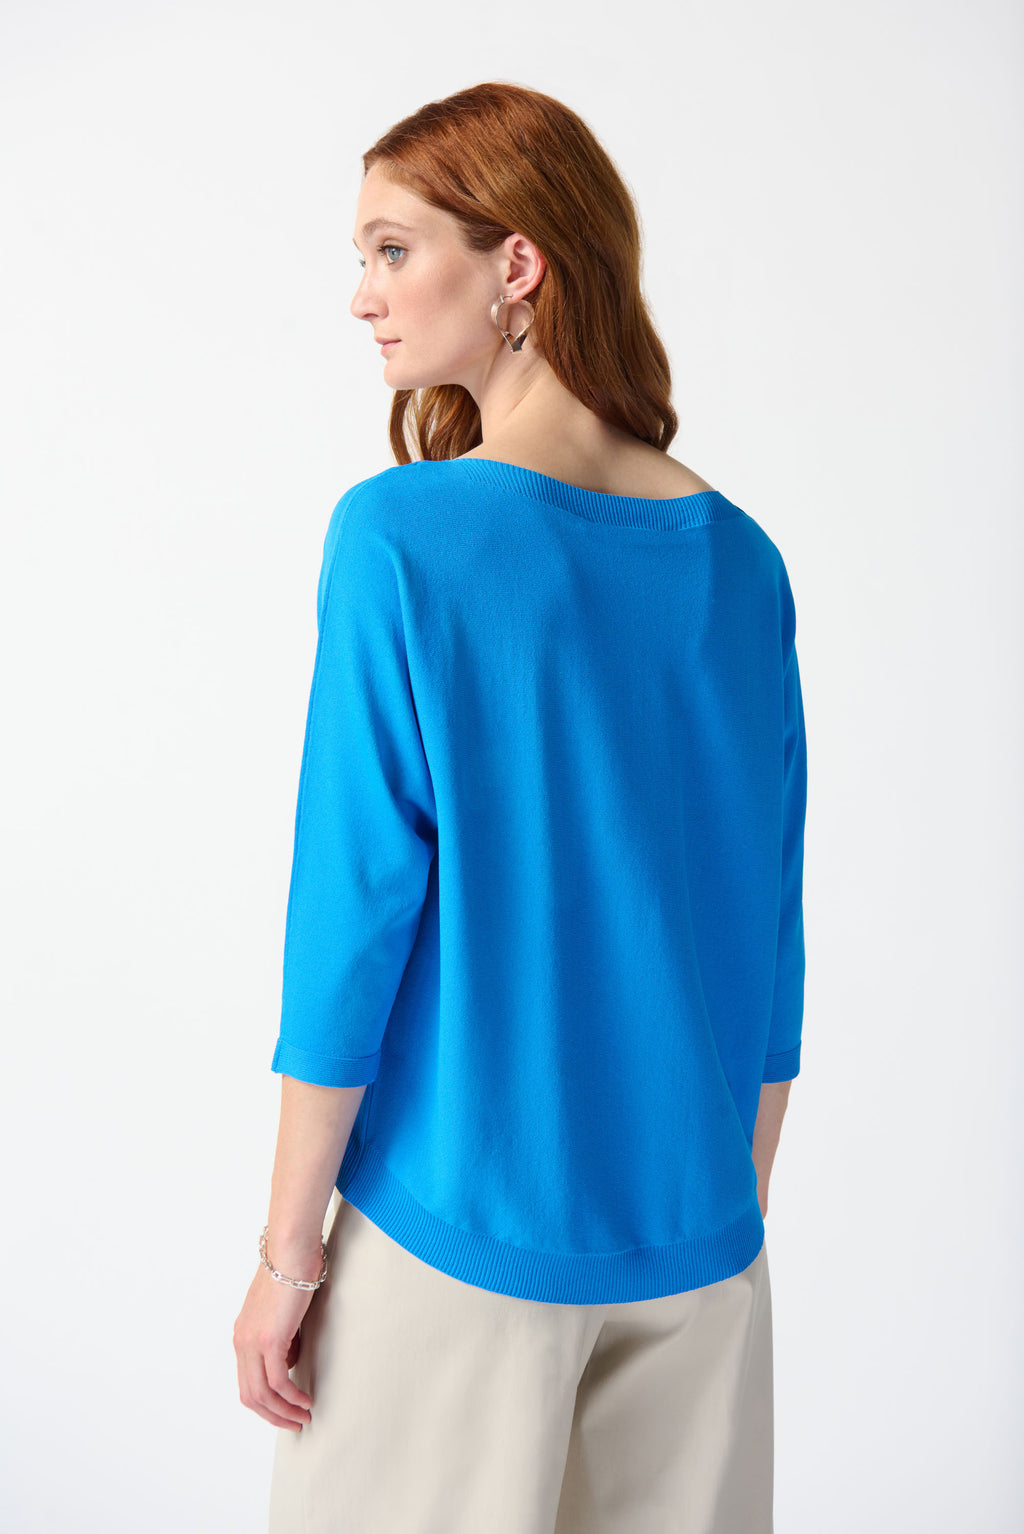 Joseph Ribkoff French Blue Pullover Sweater Style 242905